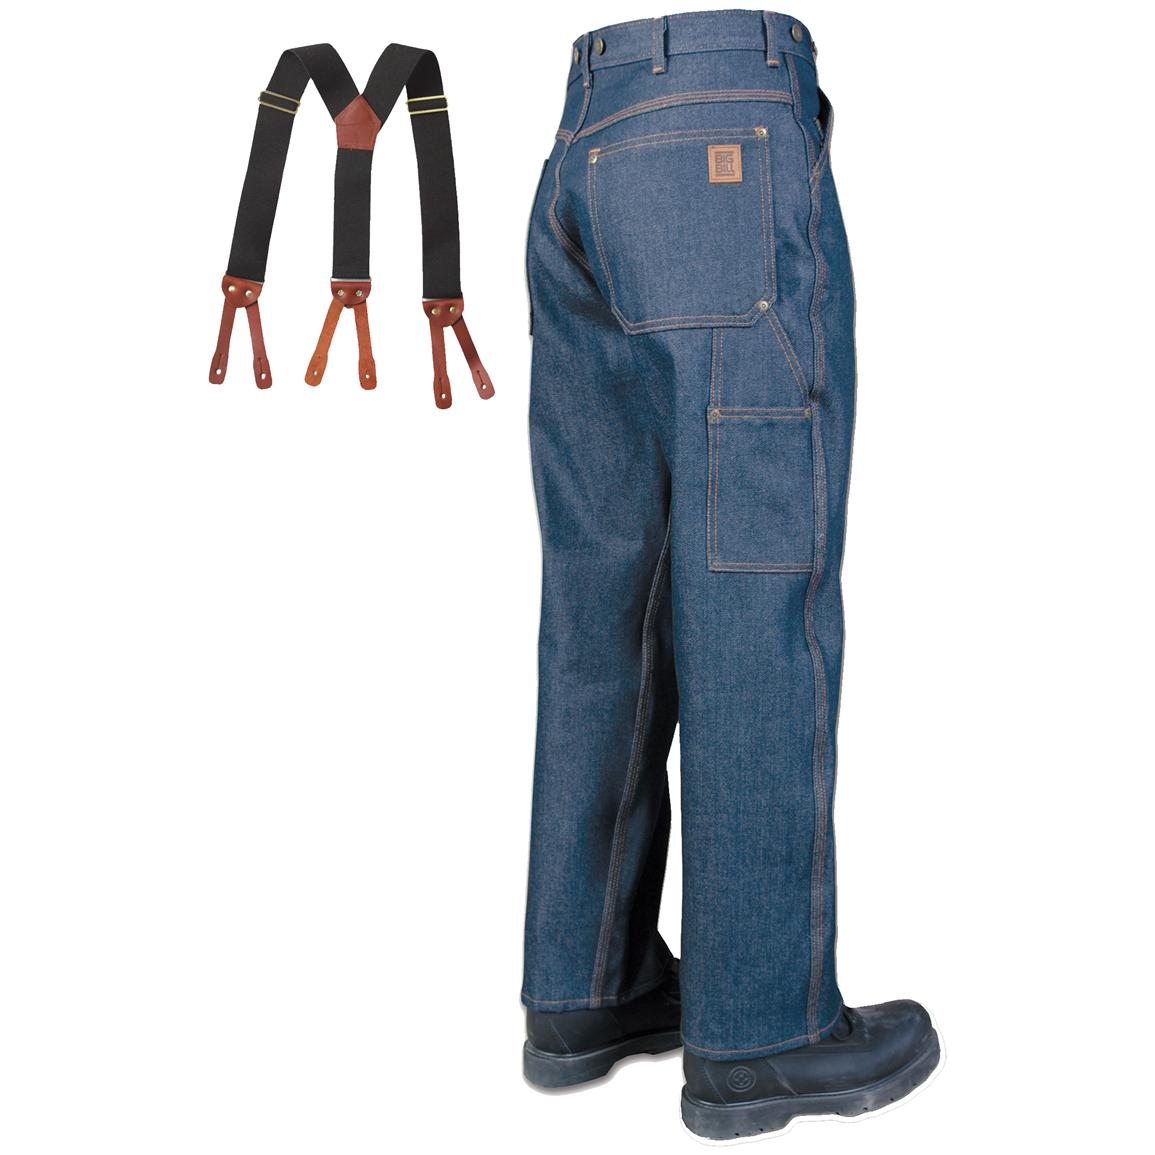 logger jeans with suspender buttons